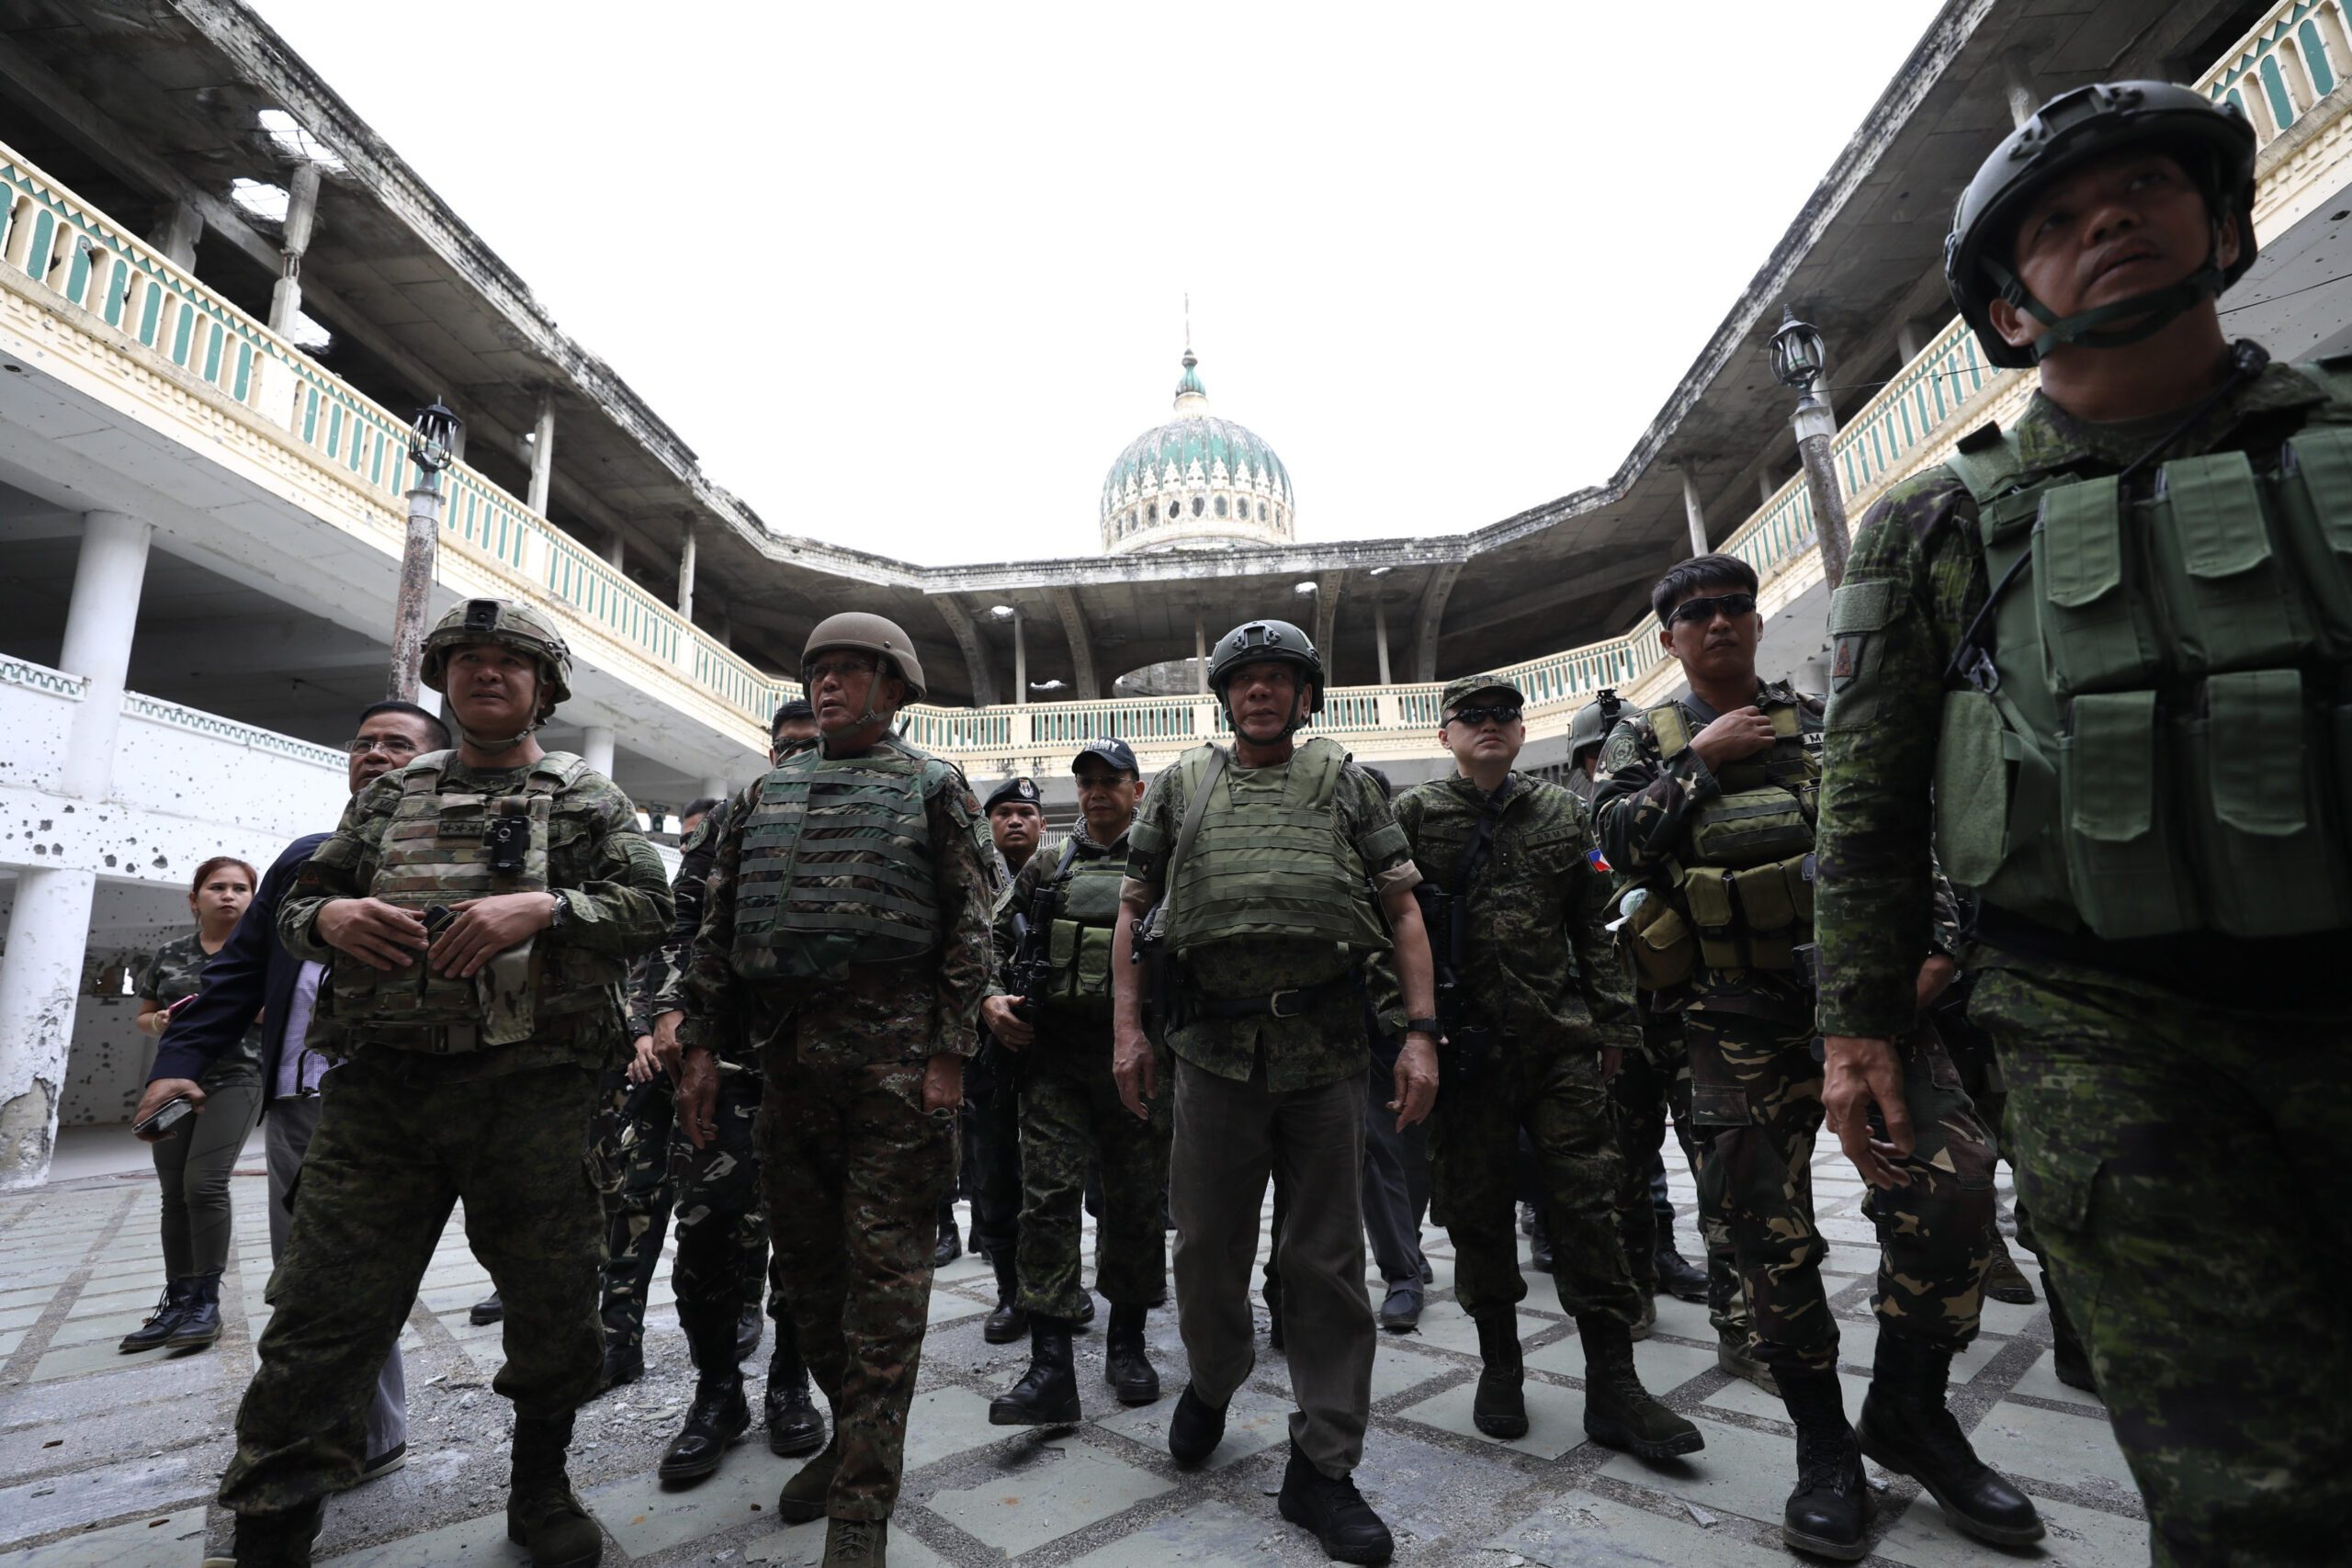 Duterte defends need to wear boots in Marawi mosque